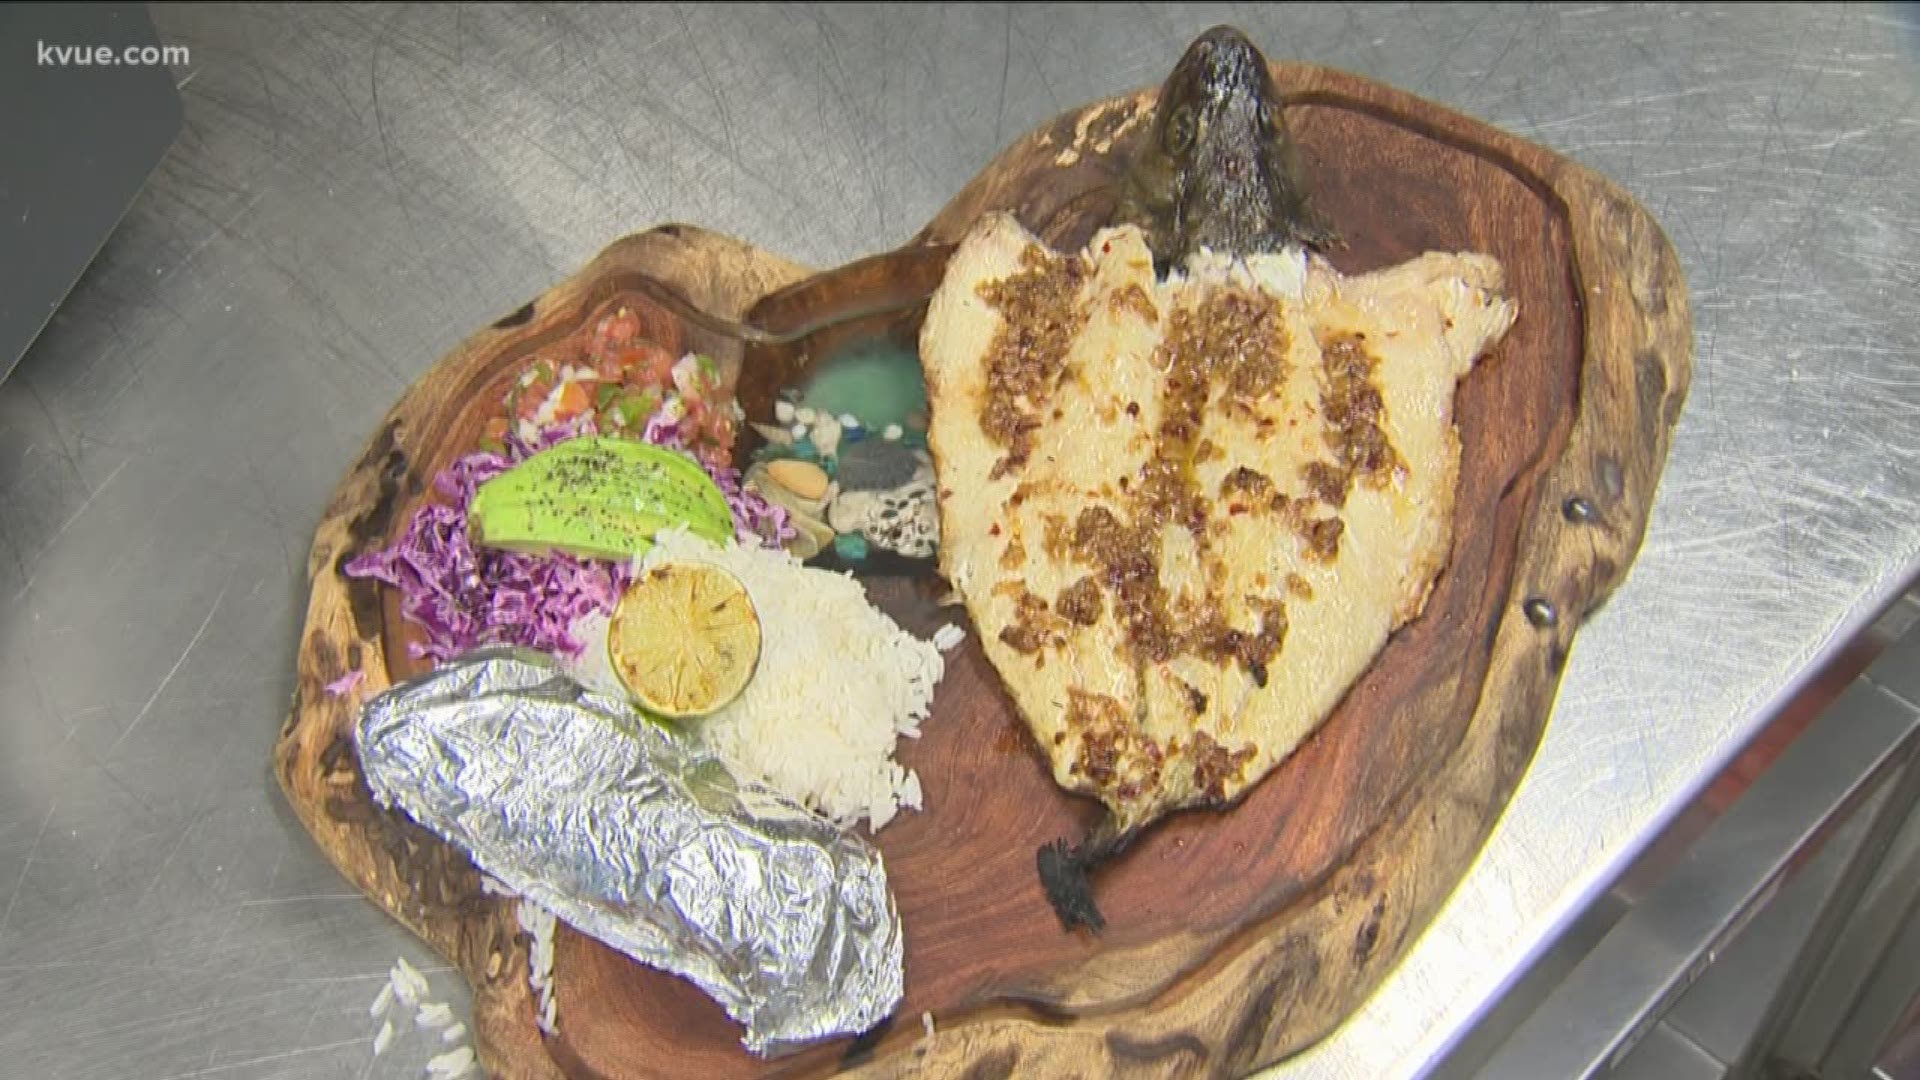 Shore Raw Bar and Grill is a new restaurant in Oak Hill located off Highway 71 and it’s this week’s Foodie Friday at KVUE!